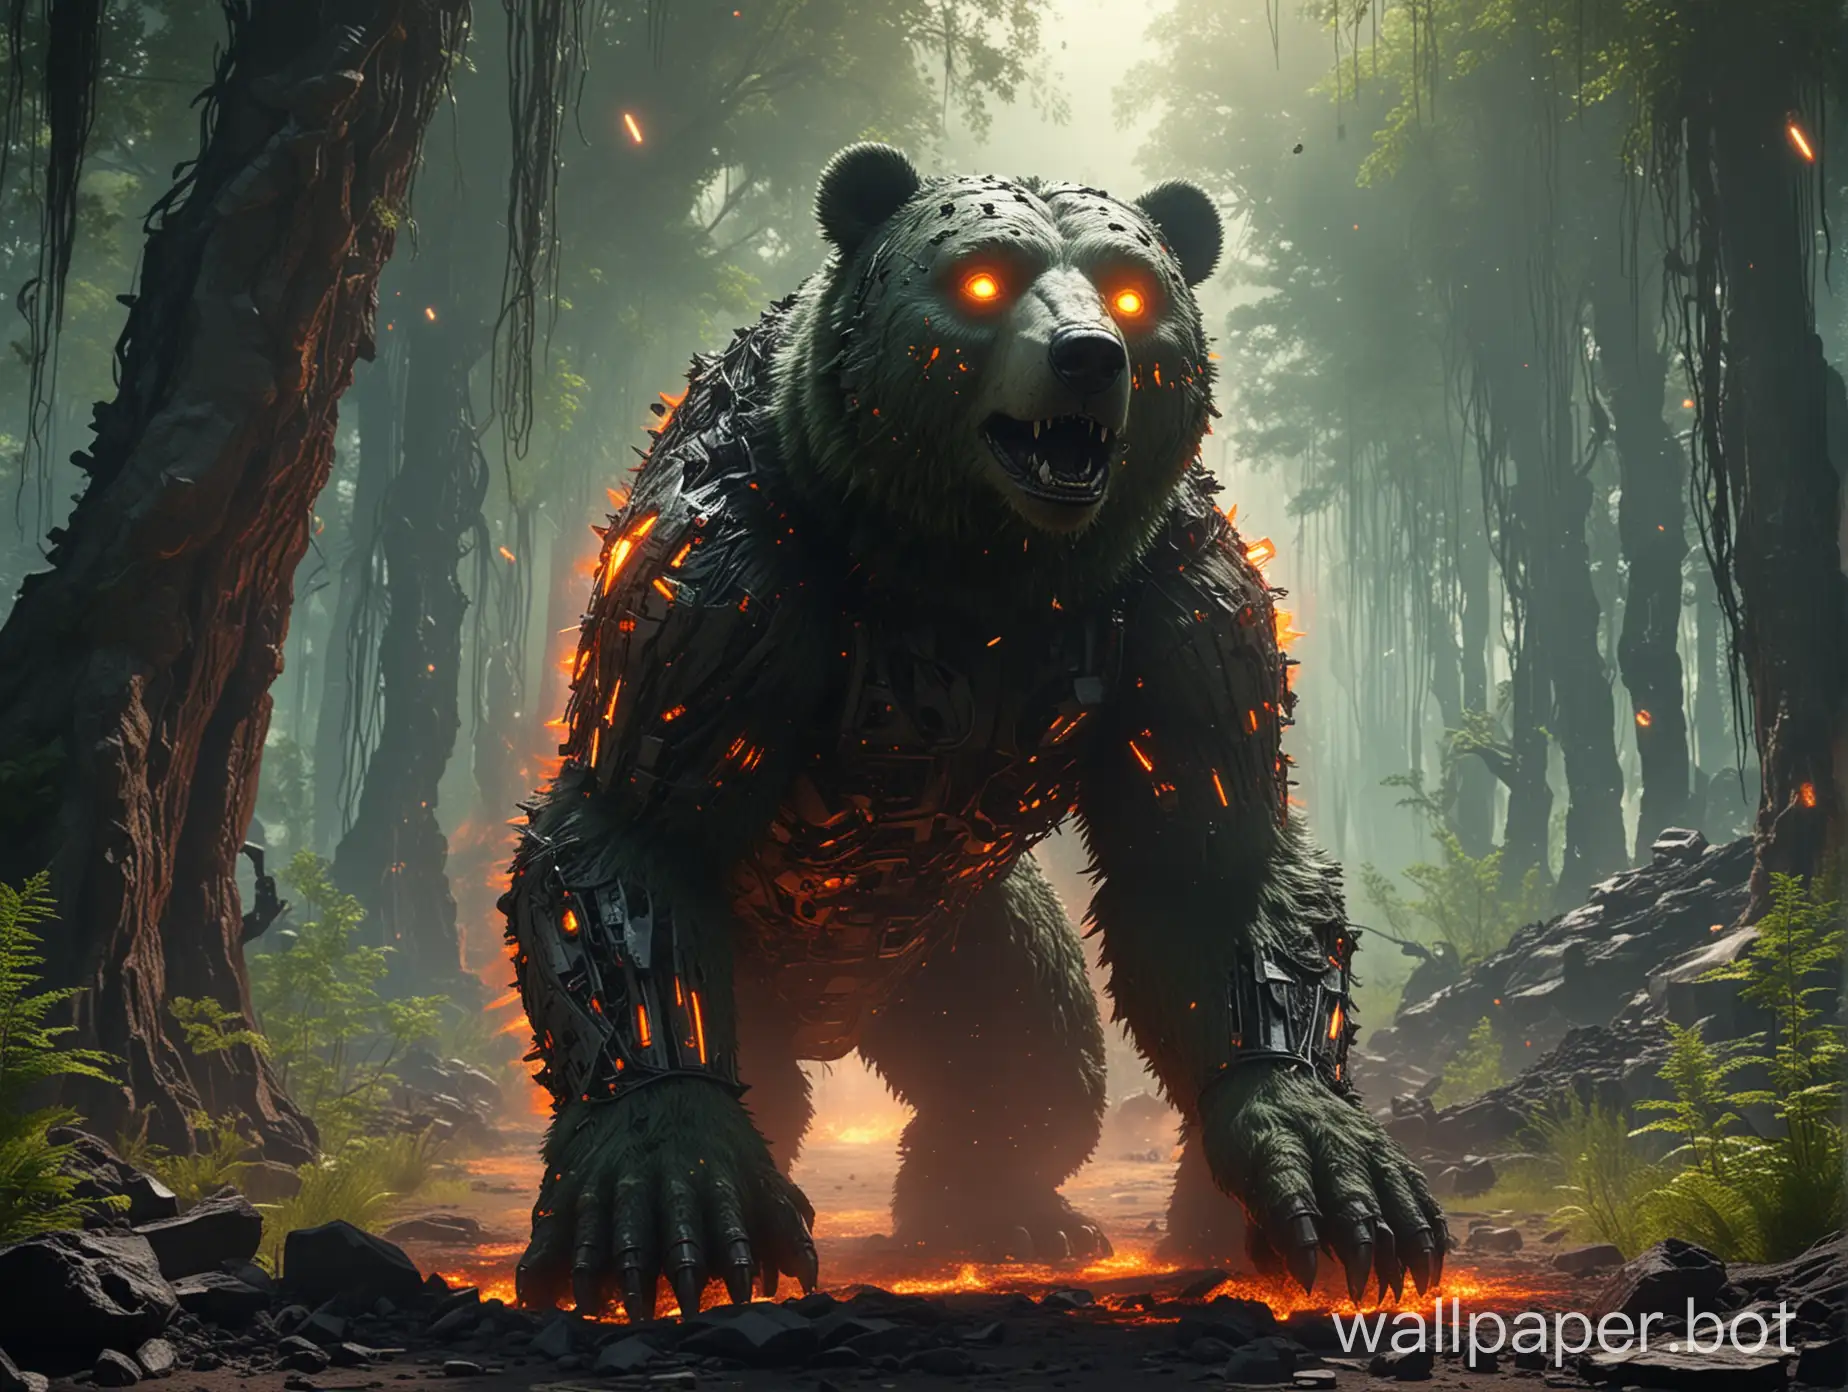 mechanical cyber bear with fiery eyes goes through the edge of the glass forest of a foreign planet, volcanic eruption in the background, green suns and stars in the science fiction genre, photorealism, 4K photo